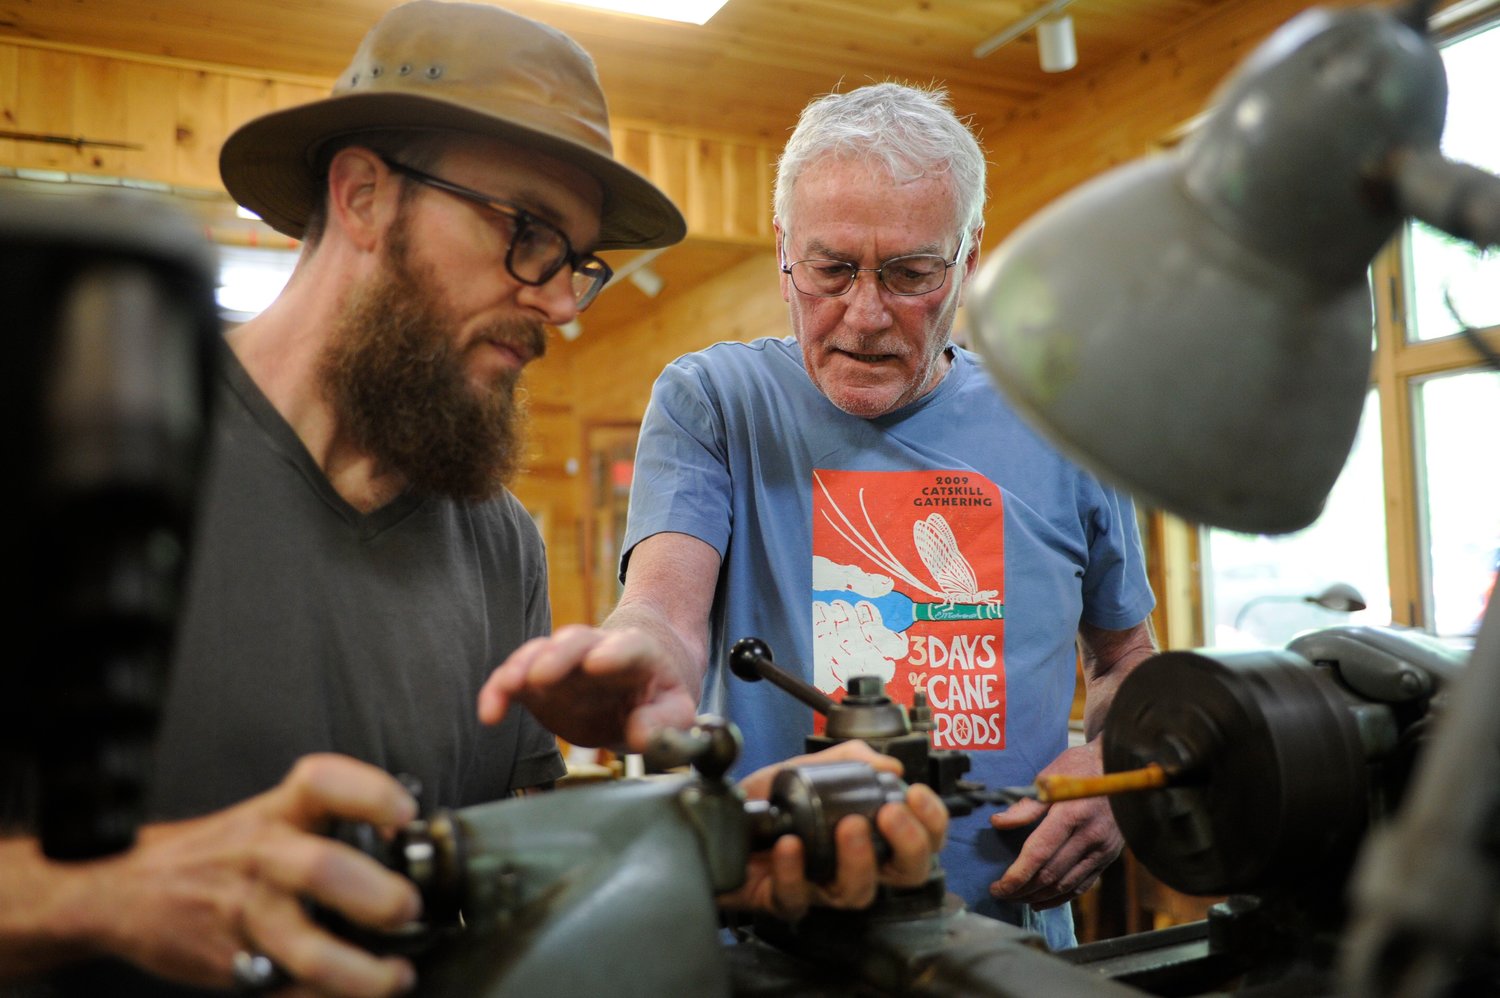 A lost art lives. Master bamboo rod maker and noted fishing guide (Ret.) Mike Canazon of Livingston Manor, NY, works with John Flynn of Downsville, NY, to fashion a split cane bamboo fly rod. The Catskill Fly Fishing Center & Museum offers classes in the almost-lost art...